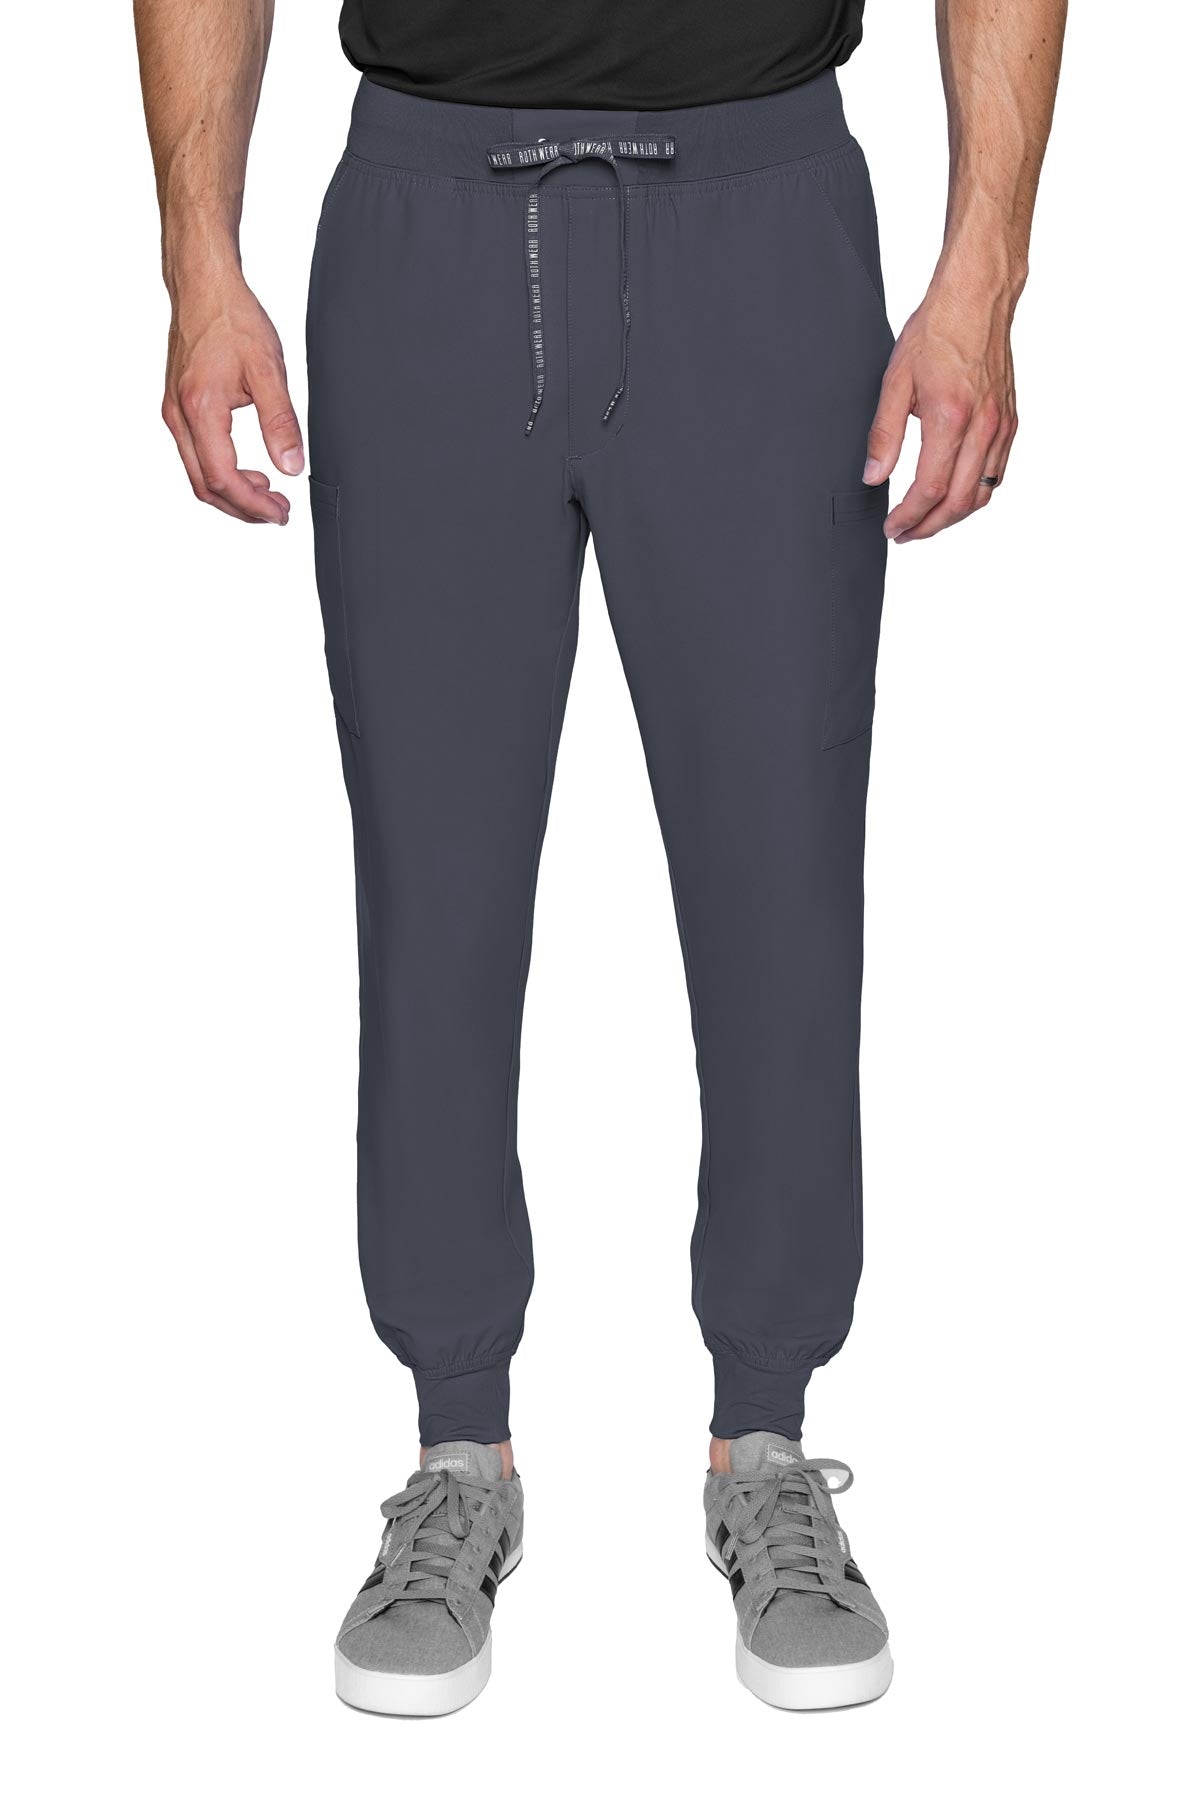 Peaches Pewter PANT